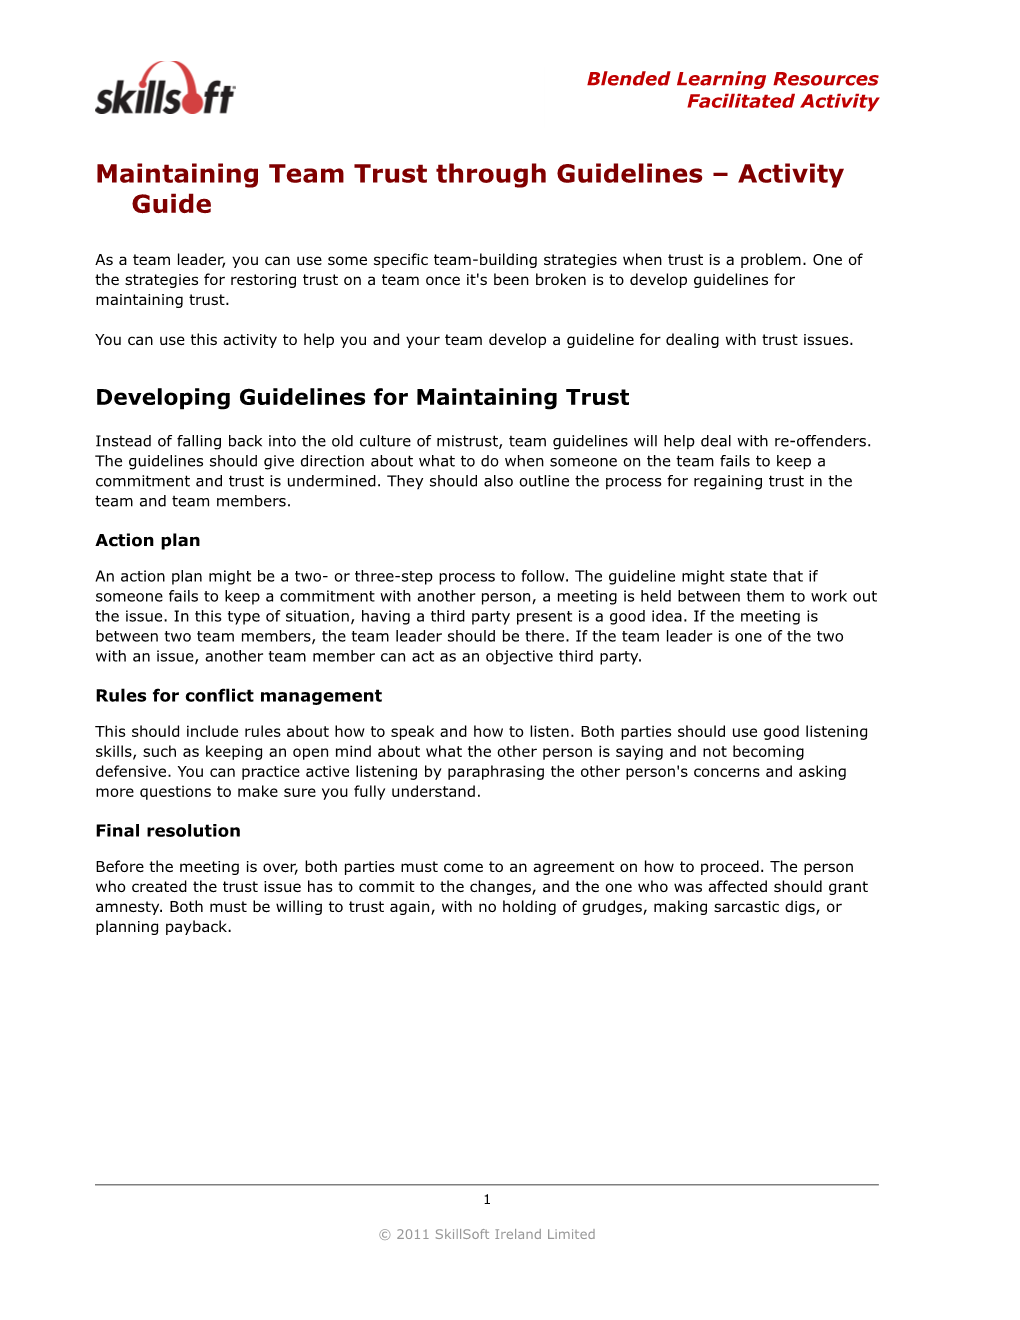 Maintaining Team Trust Through Guidelines Activity Guide